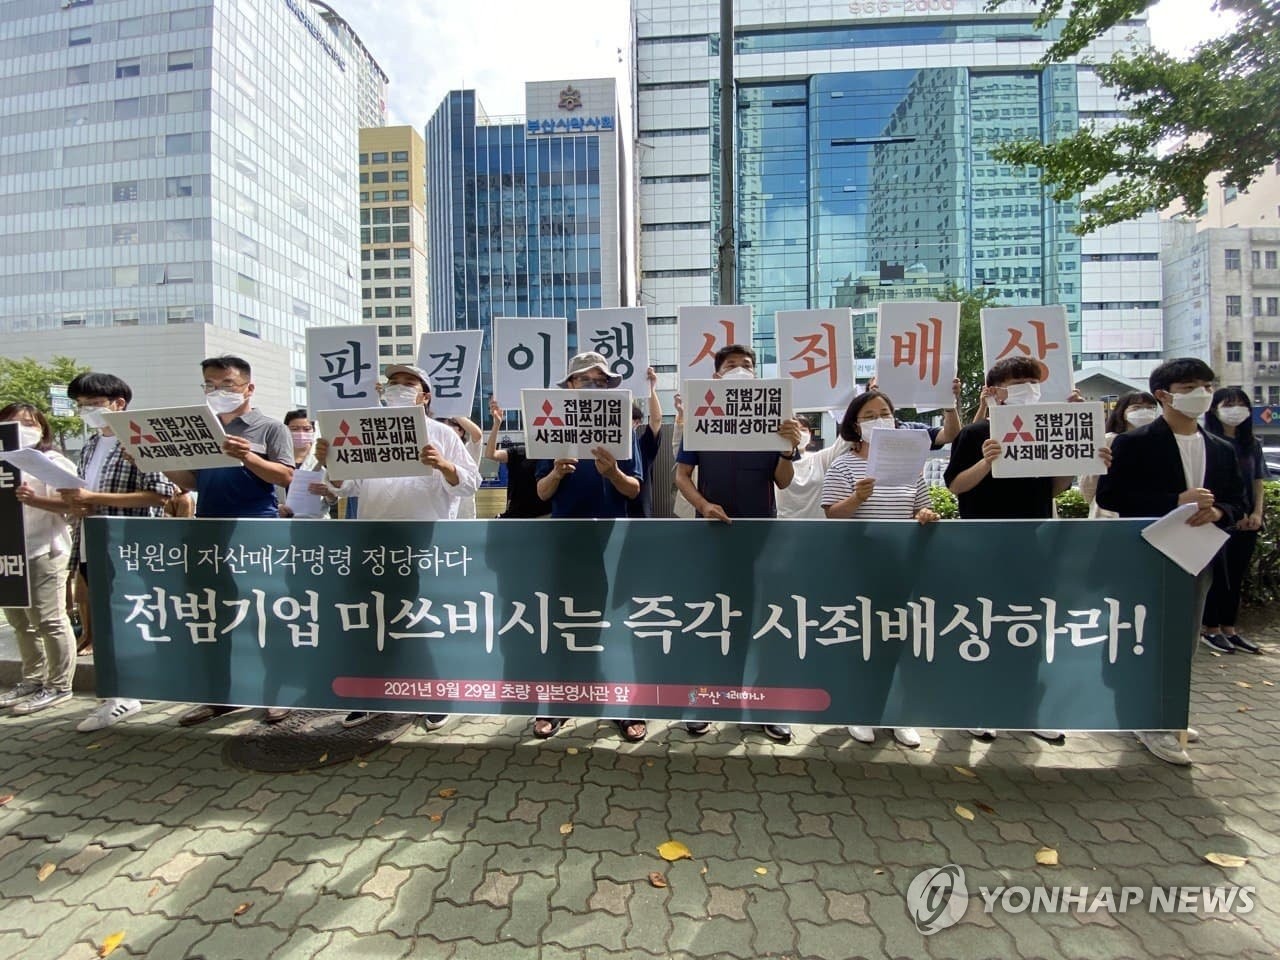 A group of South Korean civic activists calls for Japan's Mitsubishi Heavy Industries Ltd. to make an apology and provide compensation for the Korean victims of its wartime forced labor in front of the Japanese consulate general in Busan, in this Sept. 29, 2021, file photo. (Yonhap)